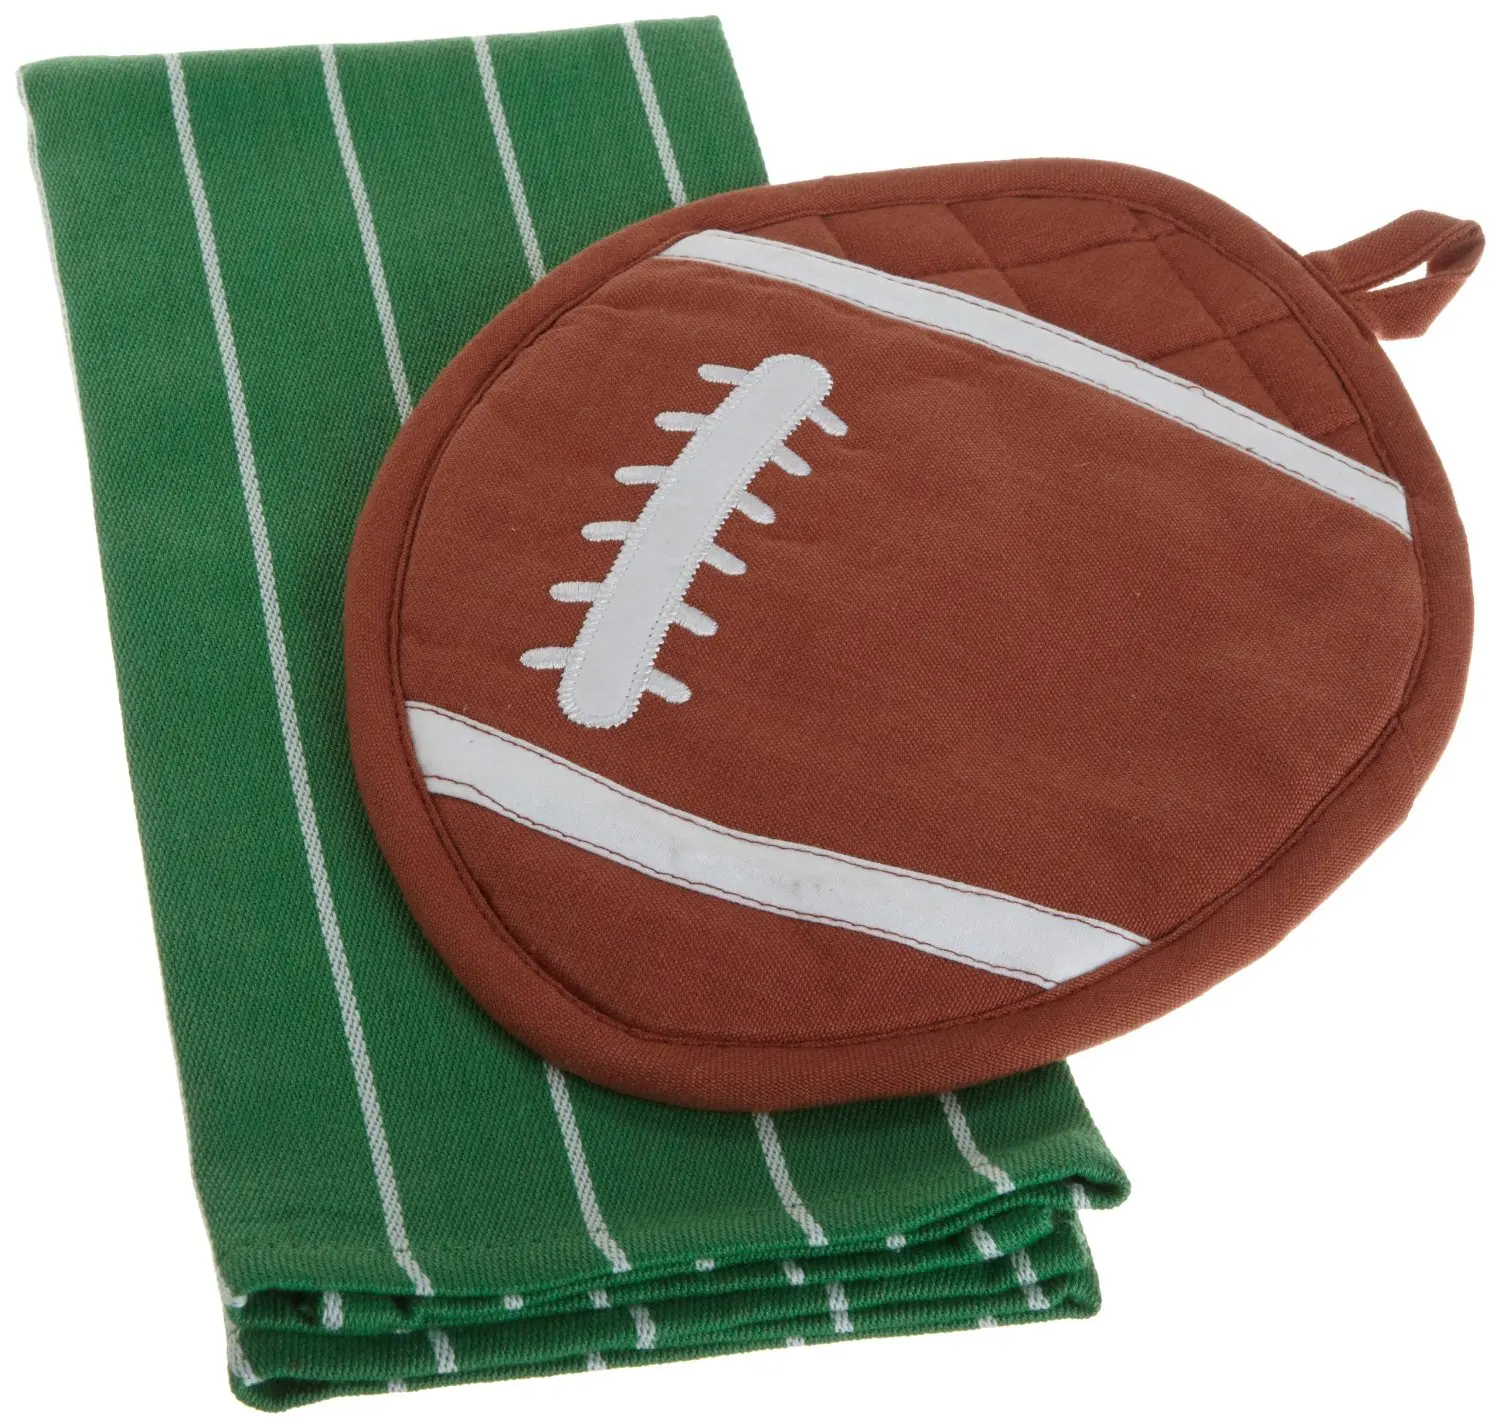 DII Game Day Football Ceramic Bowl with Lid